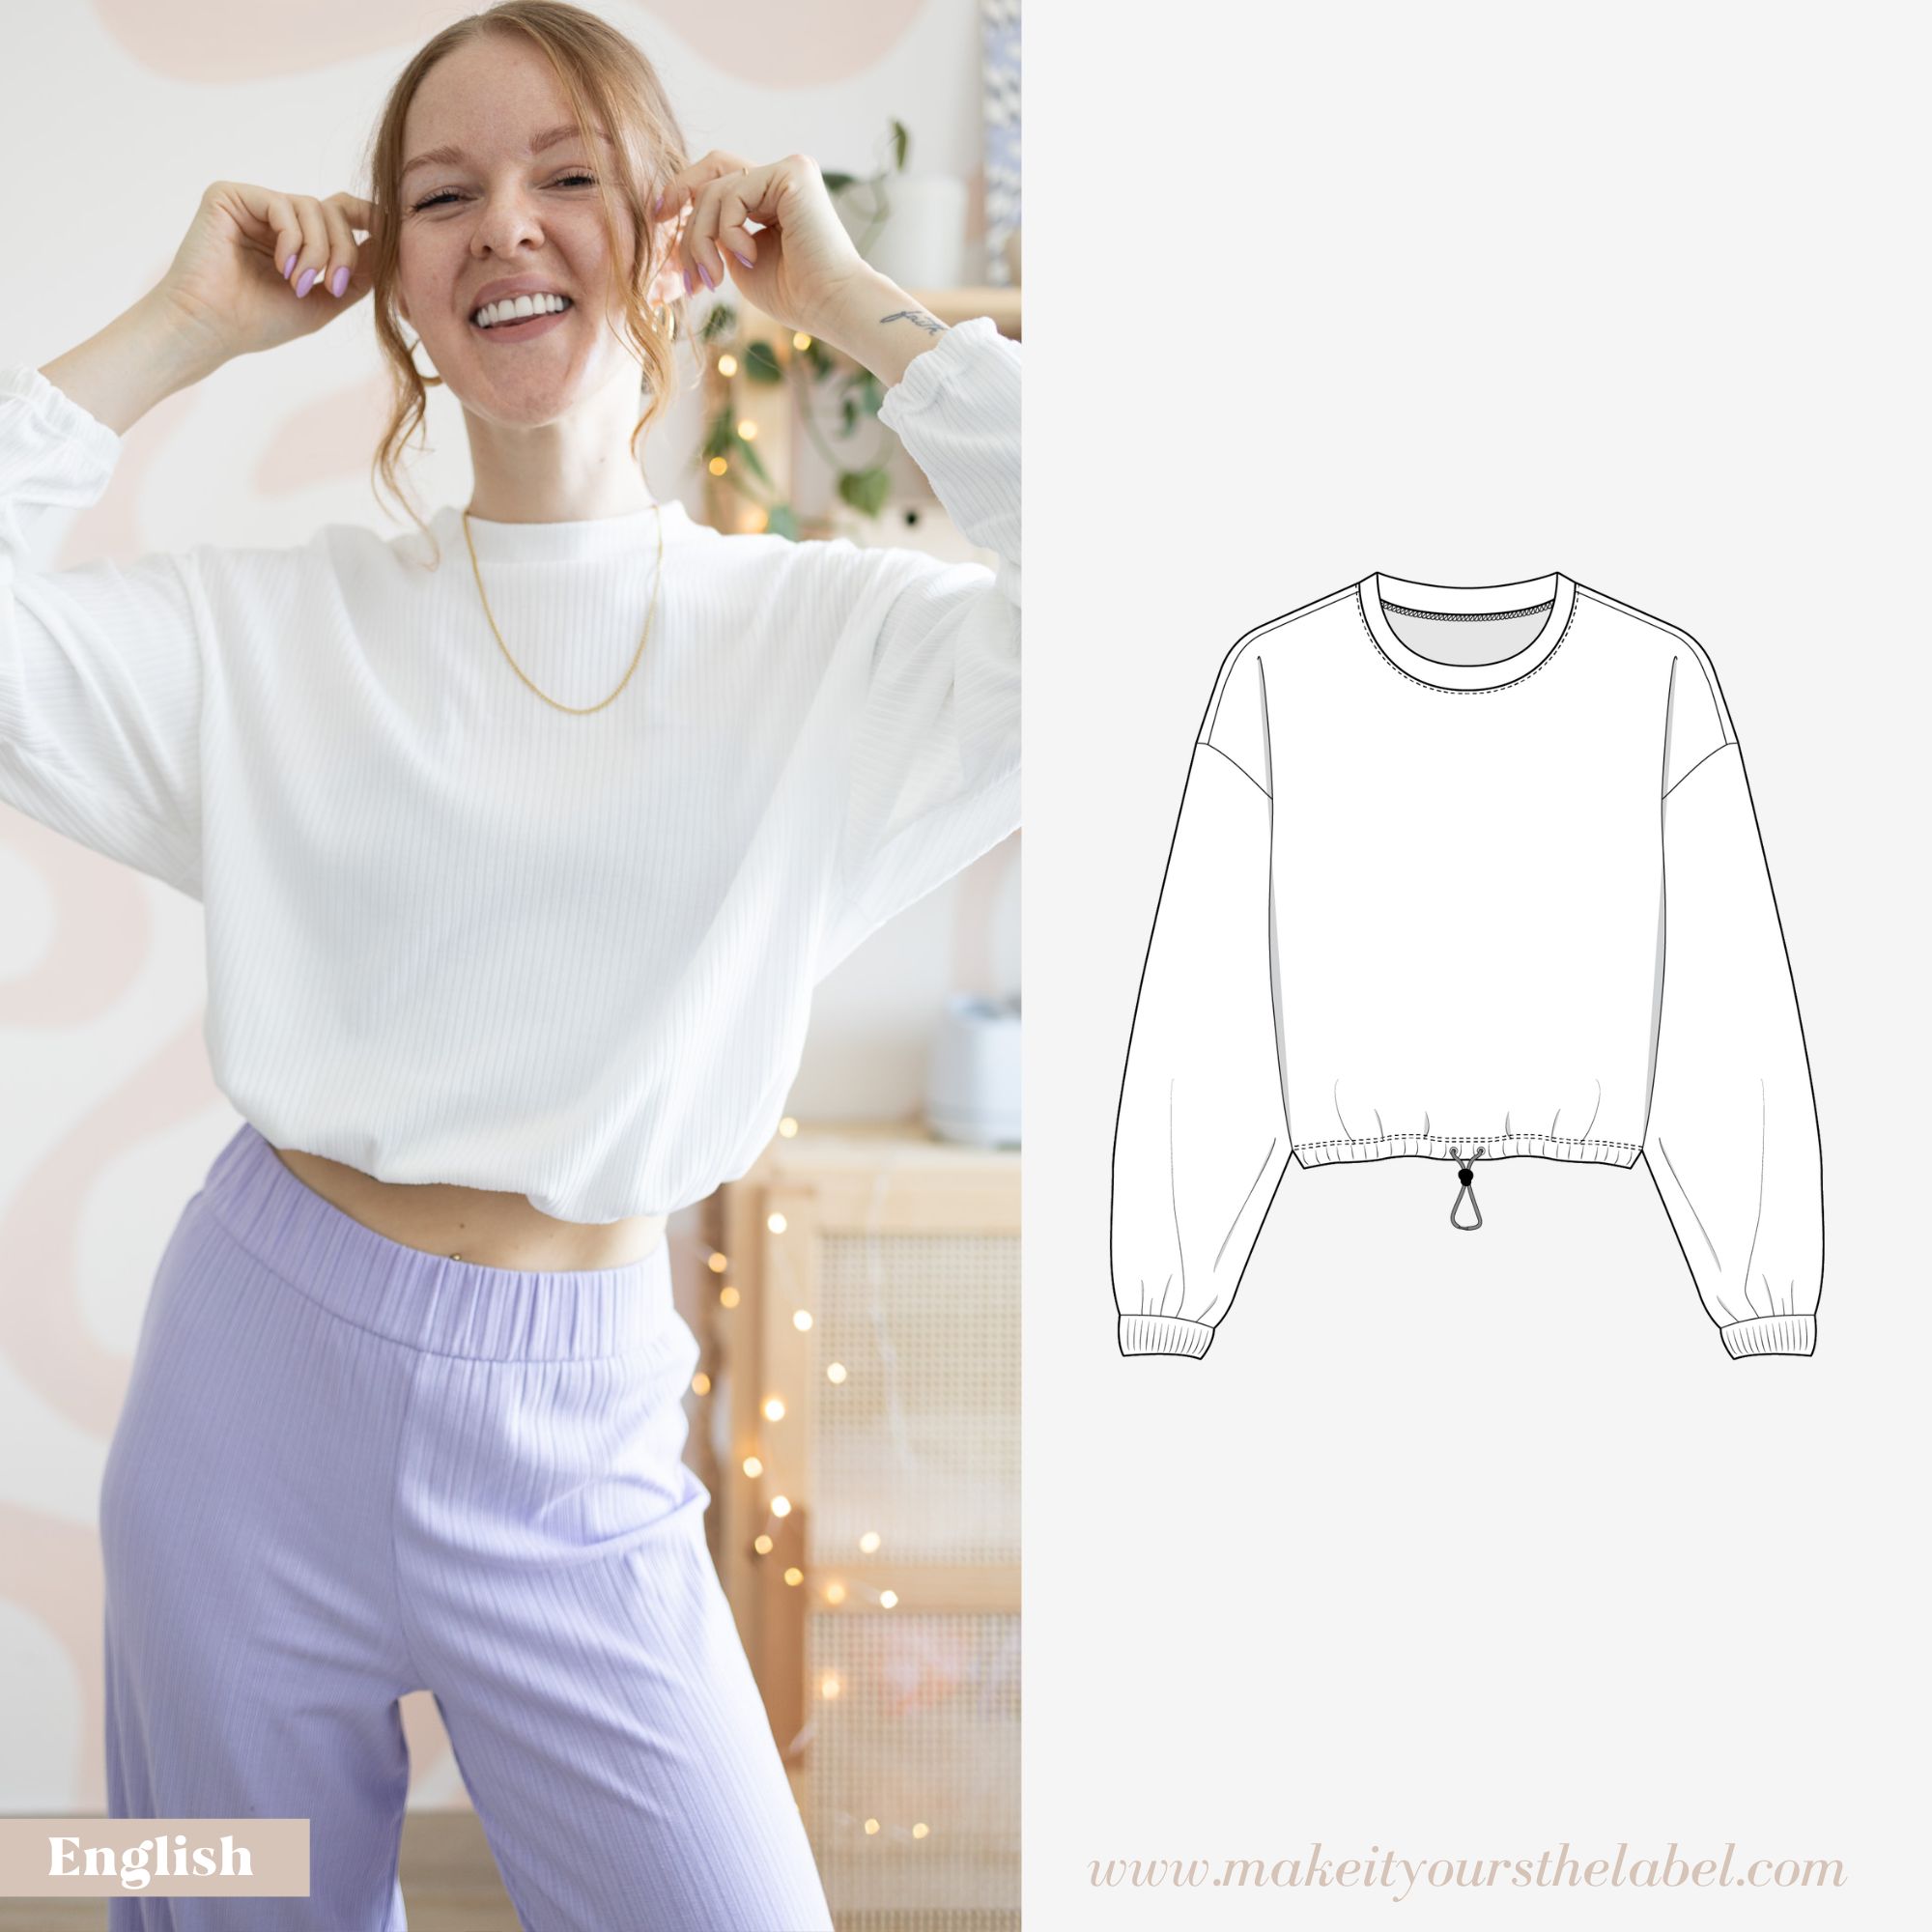 https://makeityoursthelabel.com/wp-content/uploads/2021/01/Oversized-Sweater-with-elastic-hem-Sewing-Pattern.jpg